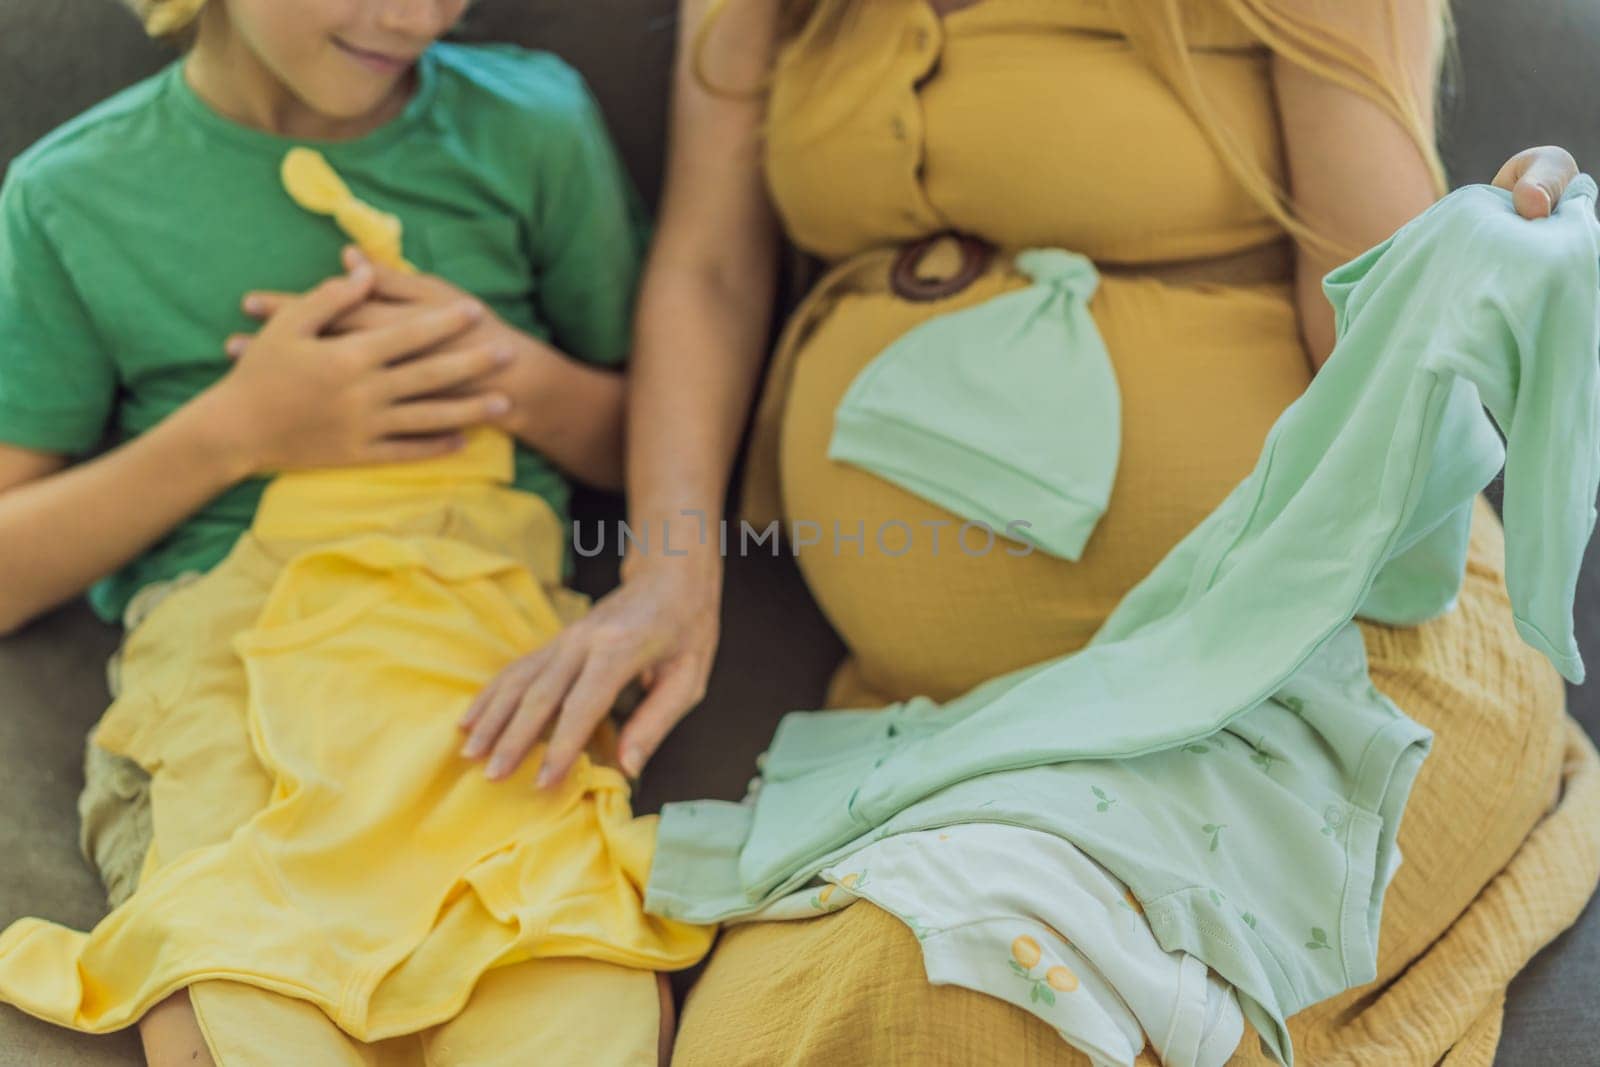 Heartwarming family moment as expectant mom and son joyfully browse through newborn baby's clothes, eagerly anticipating the arrival of a new family member.